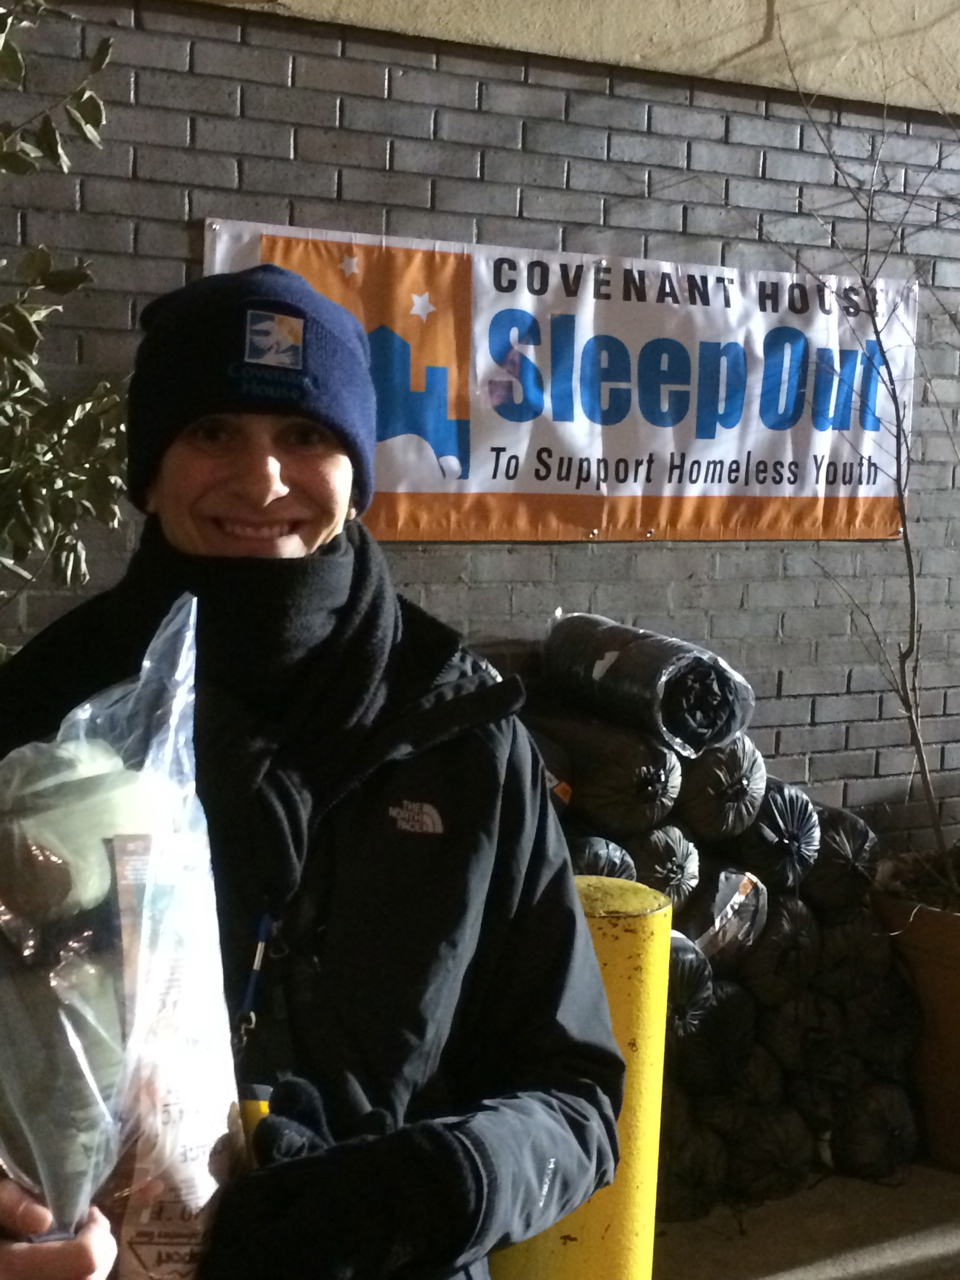 'Covenant House's Sleep Out to Support Homeless Youth,' Full article on http://1worldcinema.com